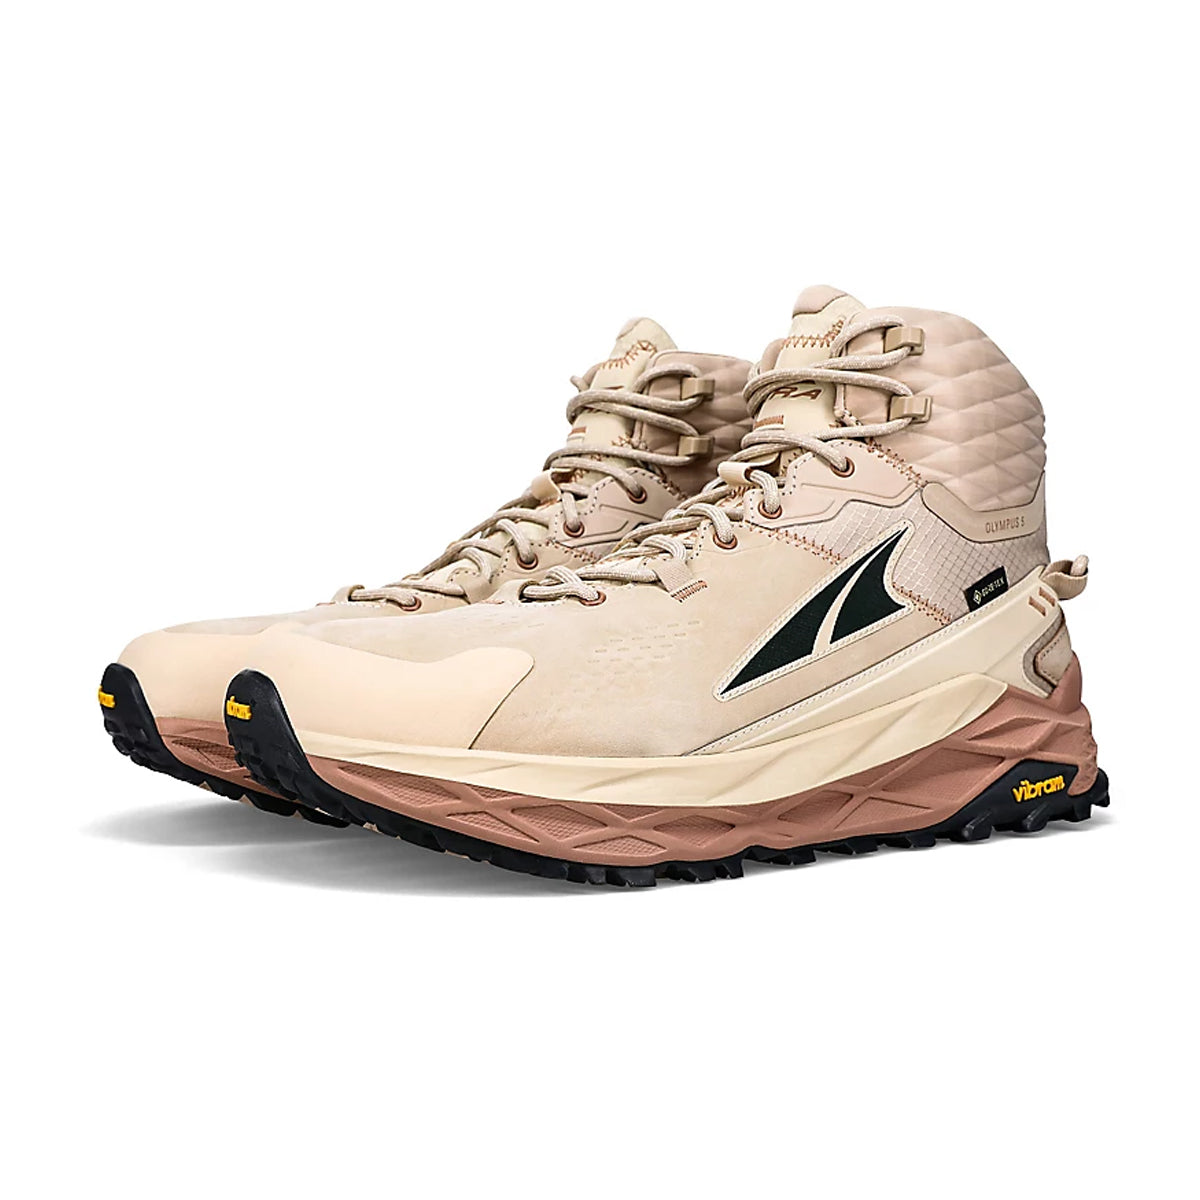 Altra Olympus 5 Hike Mid GTX in Sand by GOHUNT | Altra - GOHUNT Shop